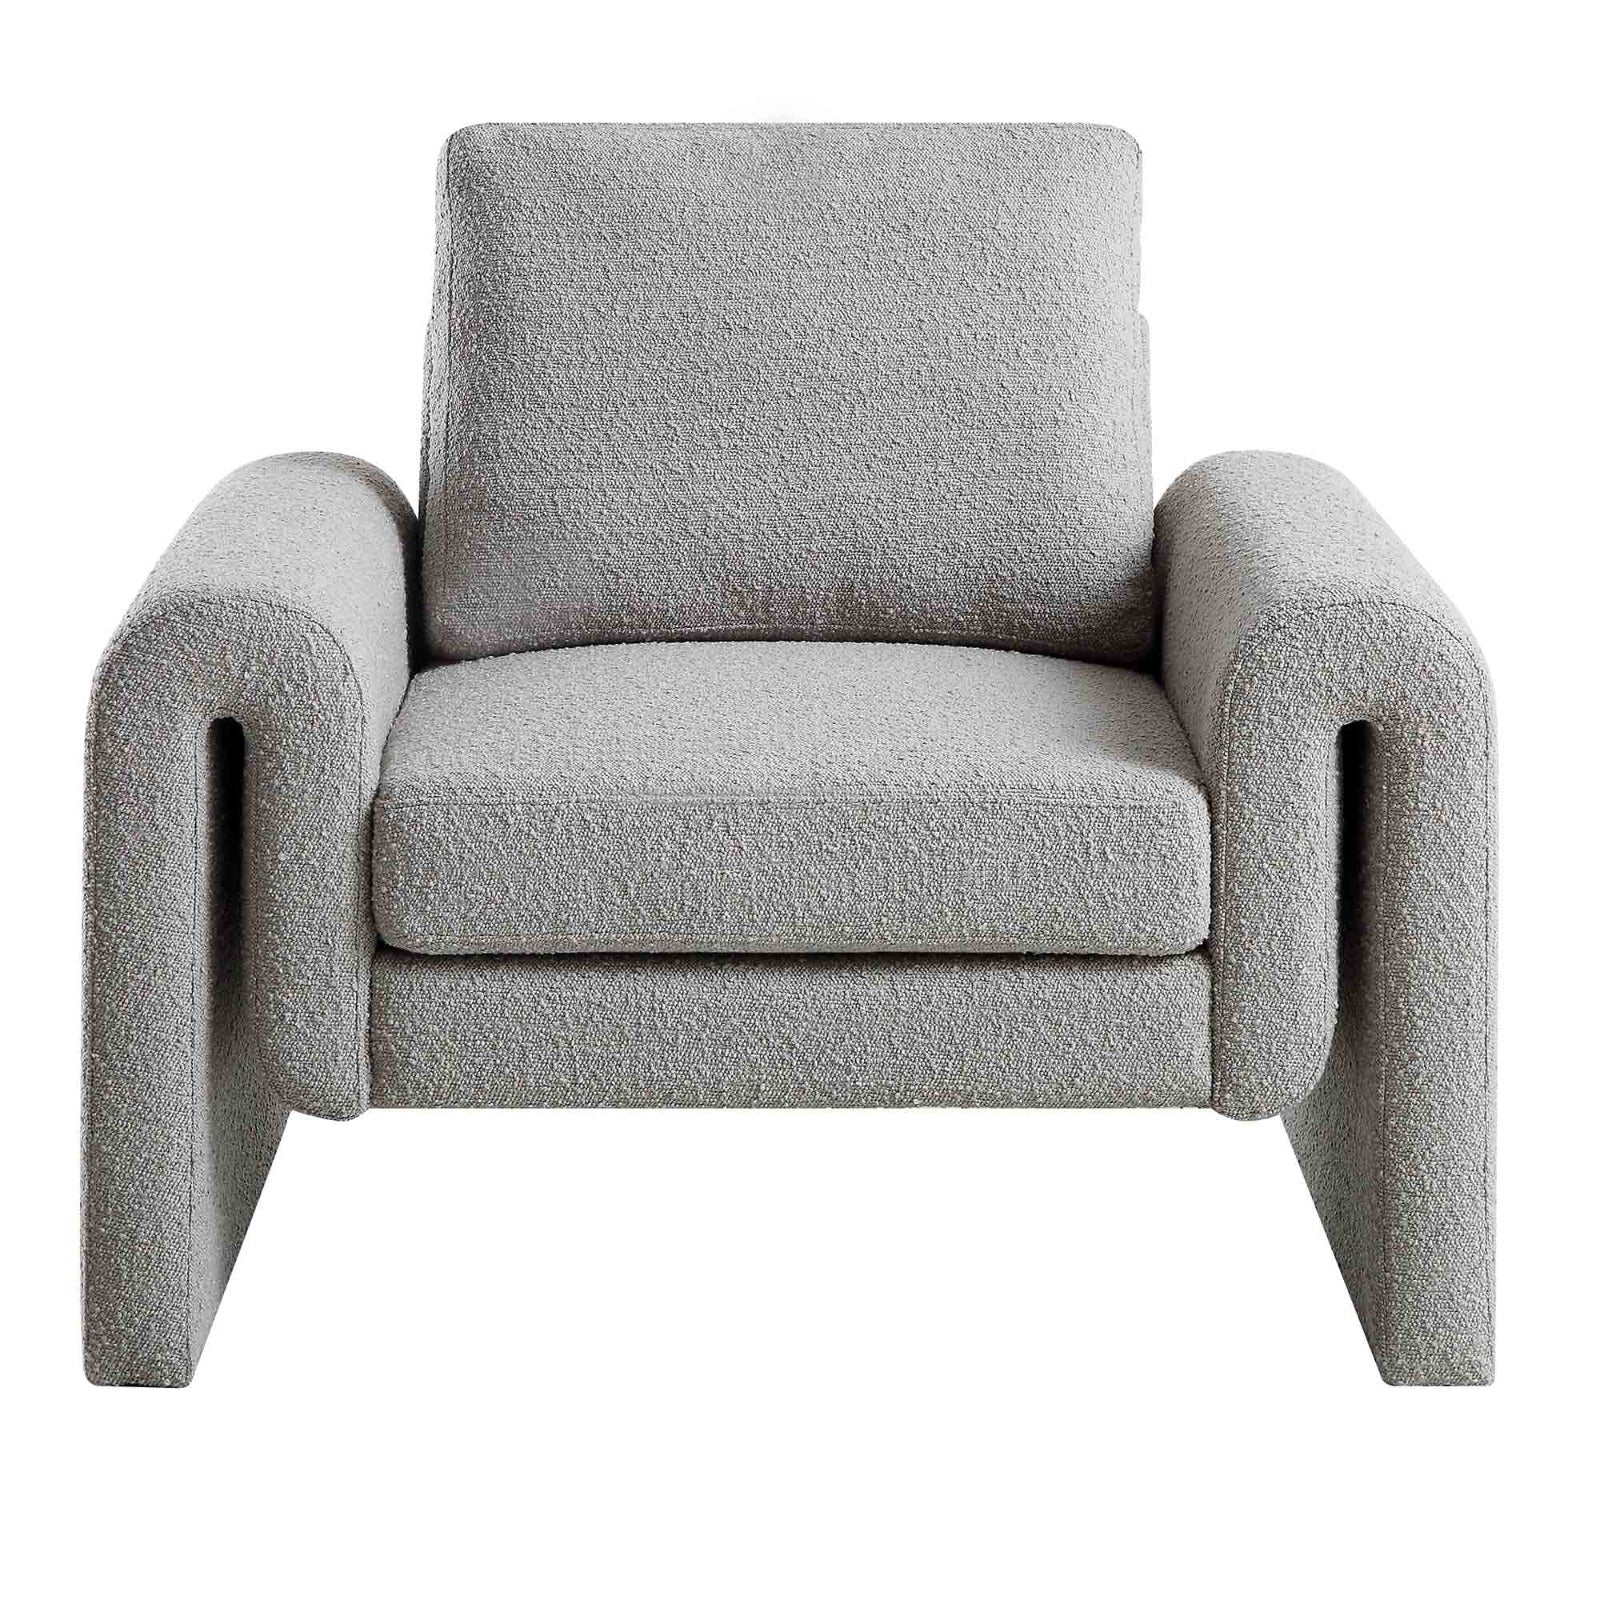 HAND CRAFTED CELESTE GREY BOUCLE CURVED ARMCHAIR